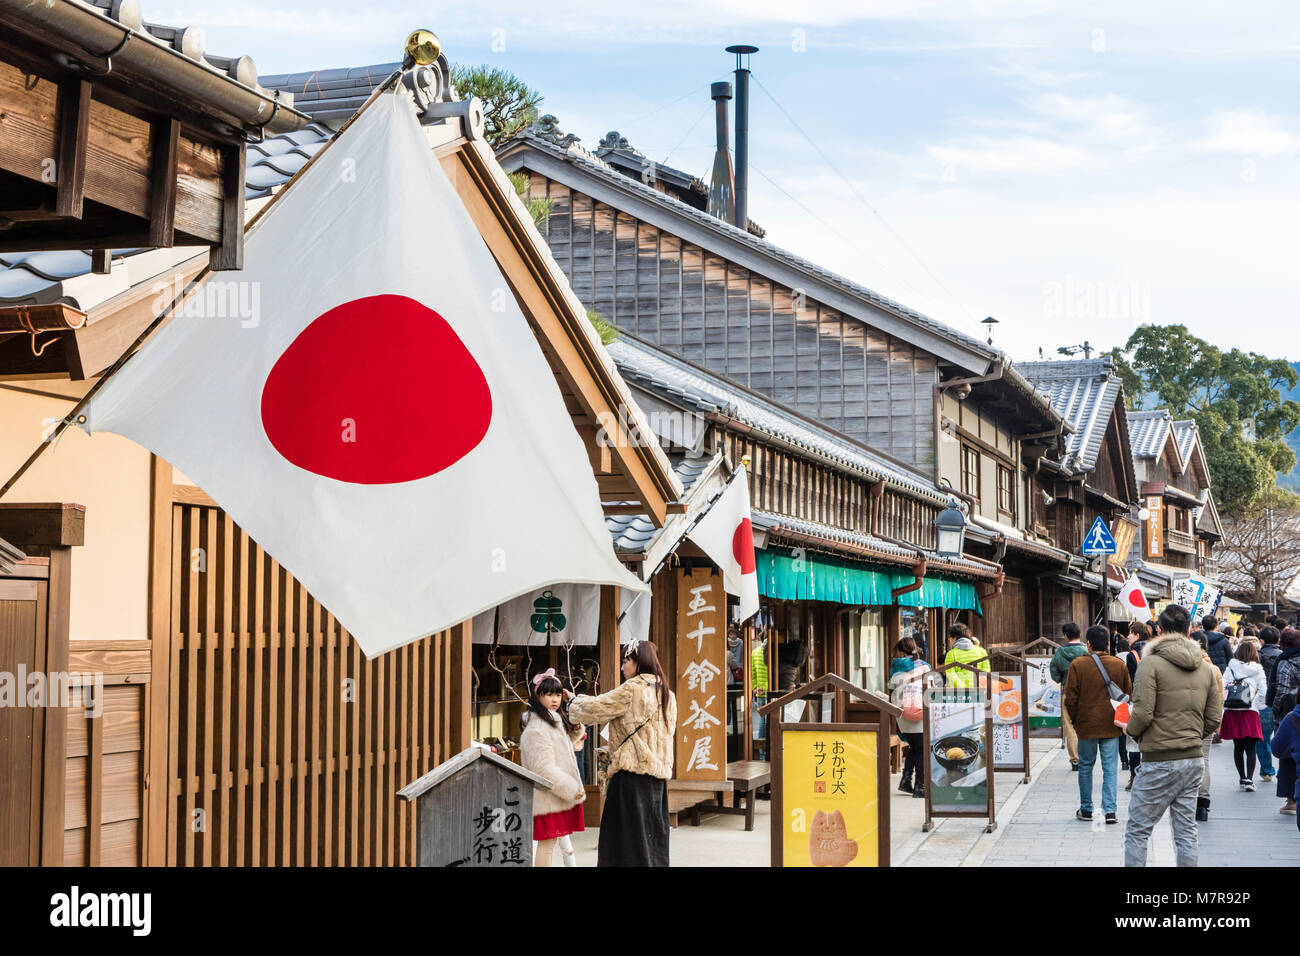 Japan, Ise. Oharai-machi pedestrian street with Edo period restored stores and shops. Japanese flag hanging from building and view along shopfronts. Stock Photo